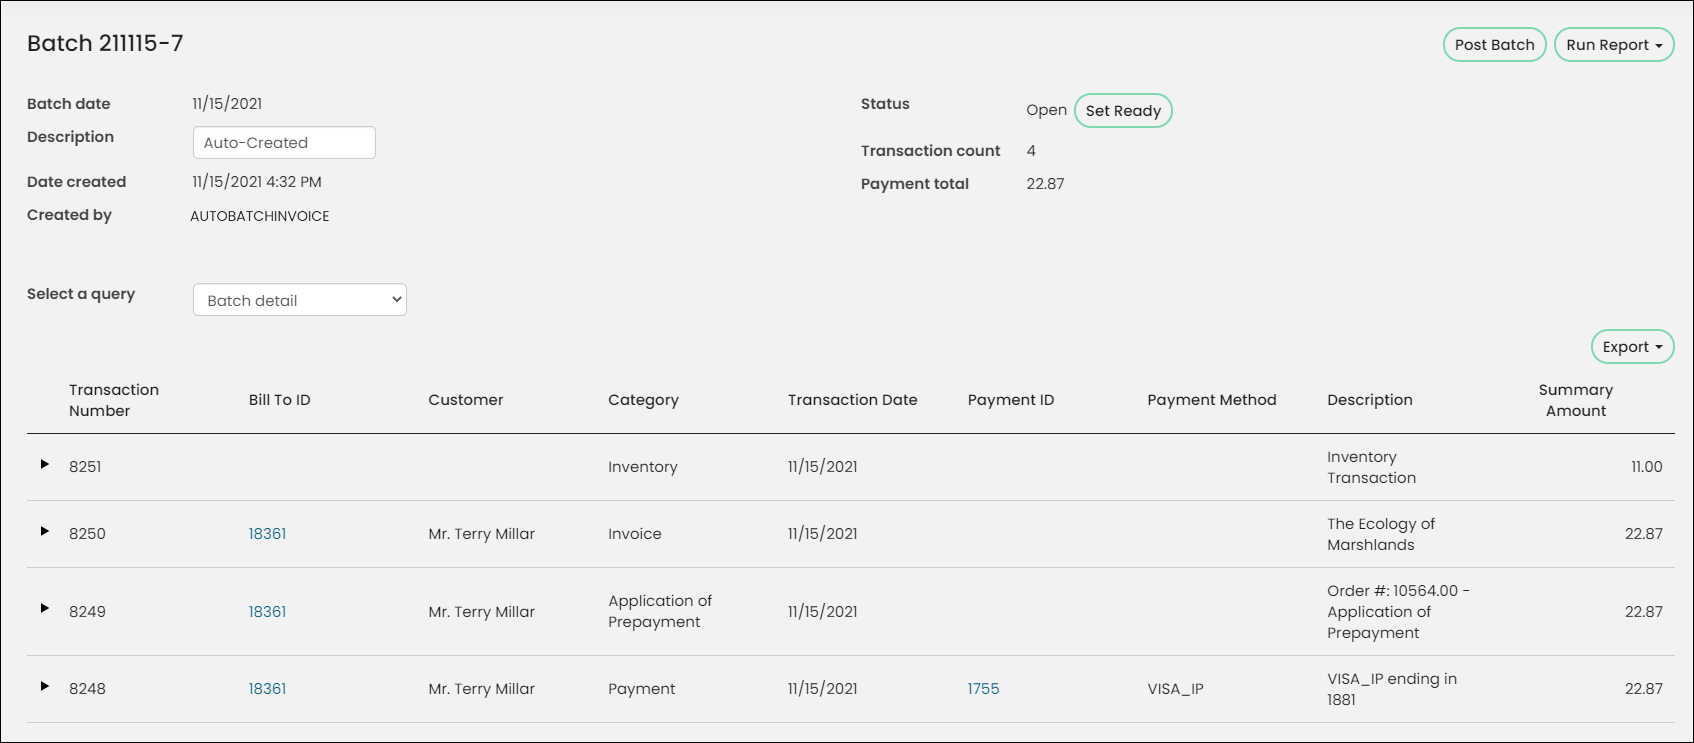 Showing the transactions created after the product has shipped and invoiced